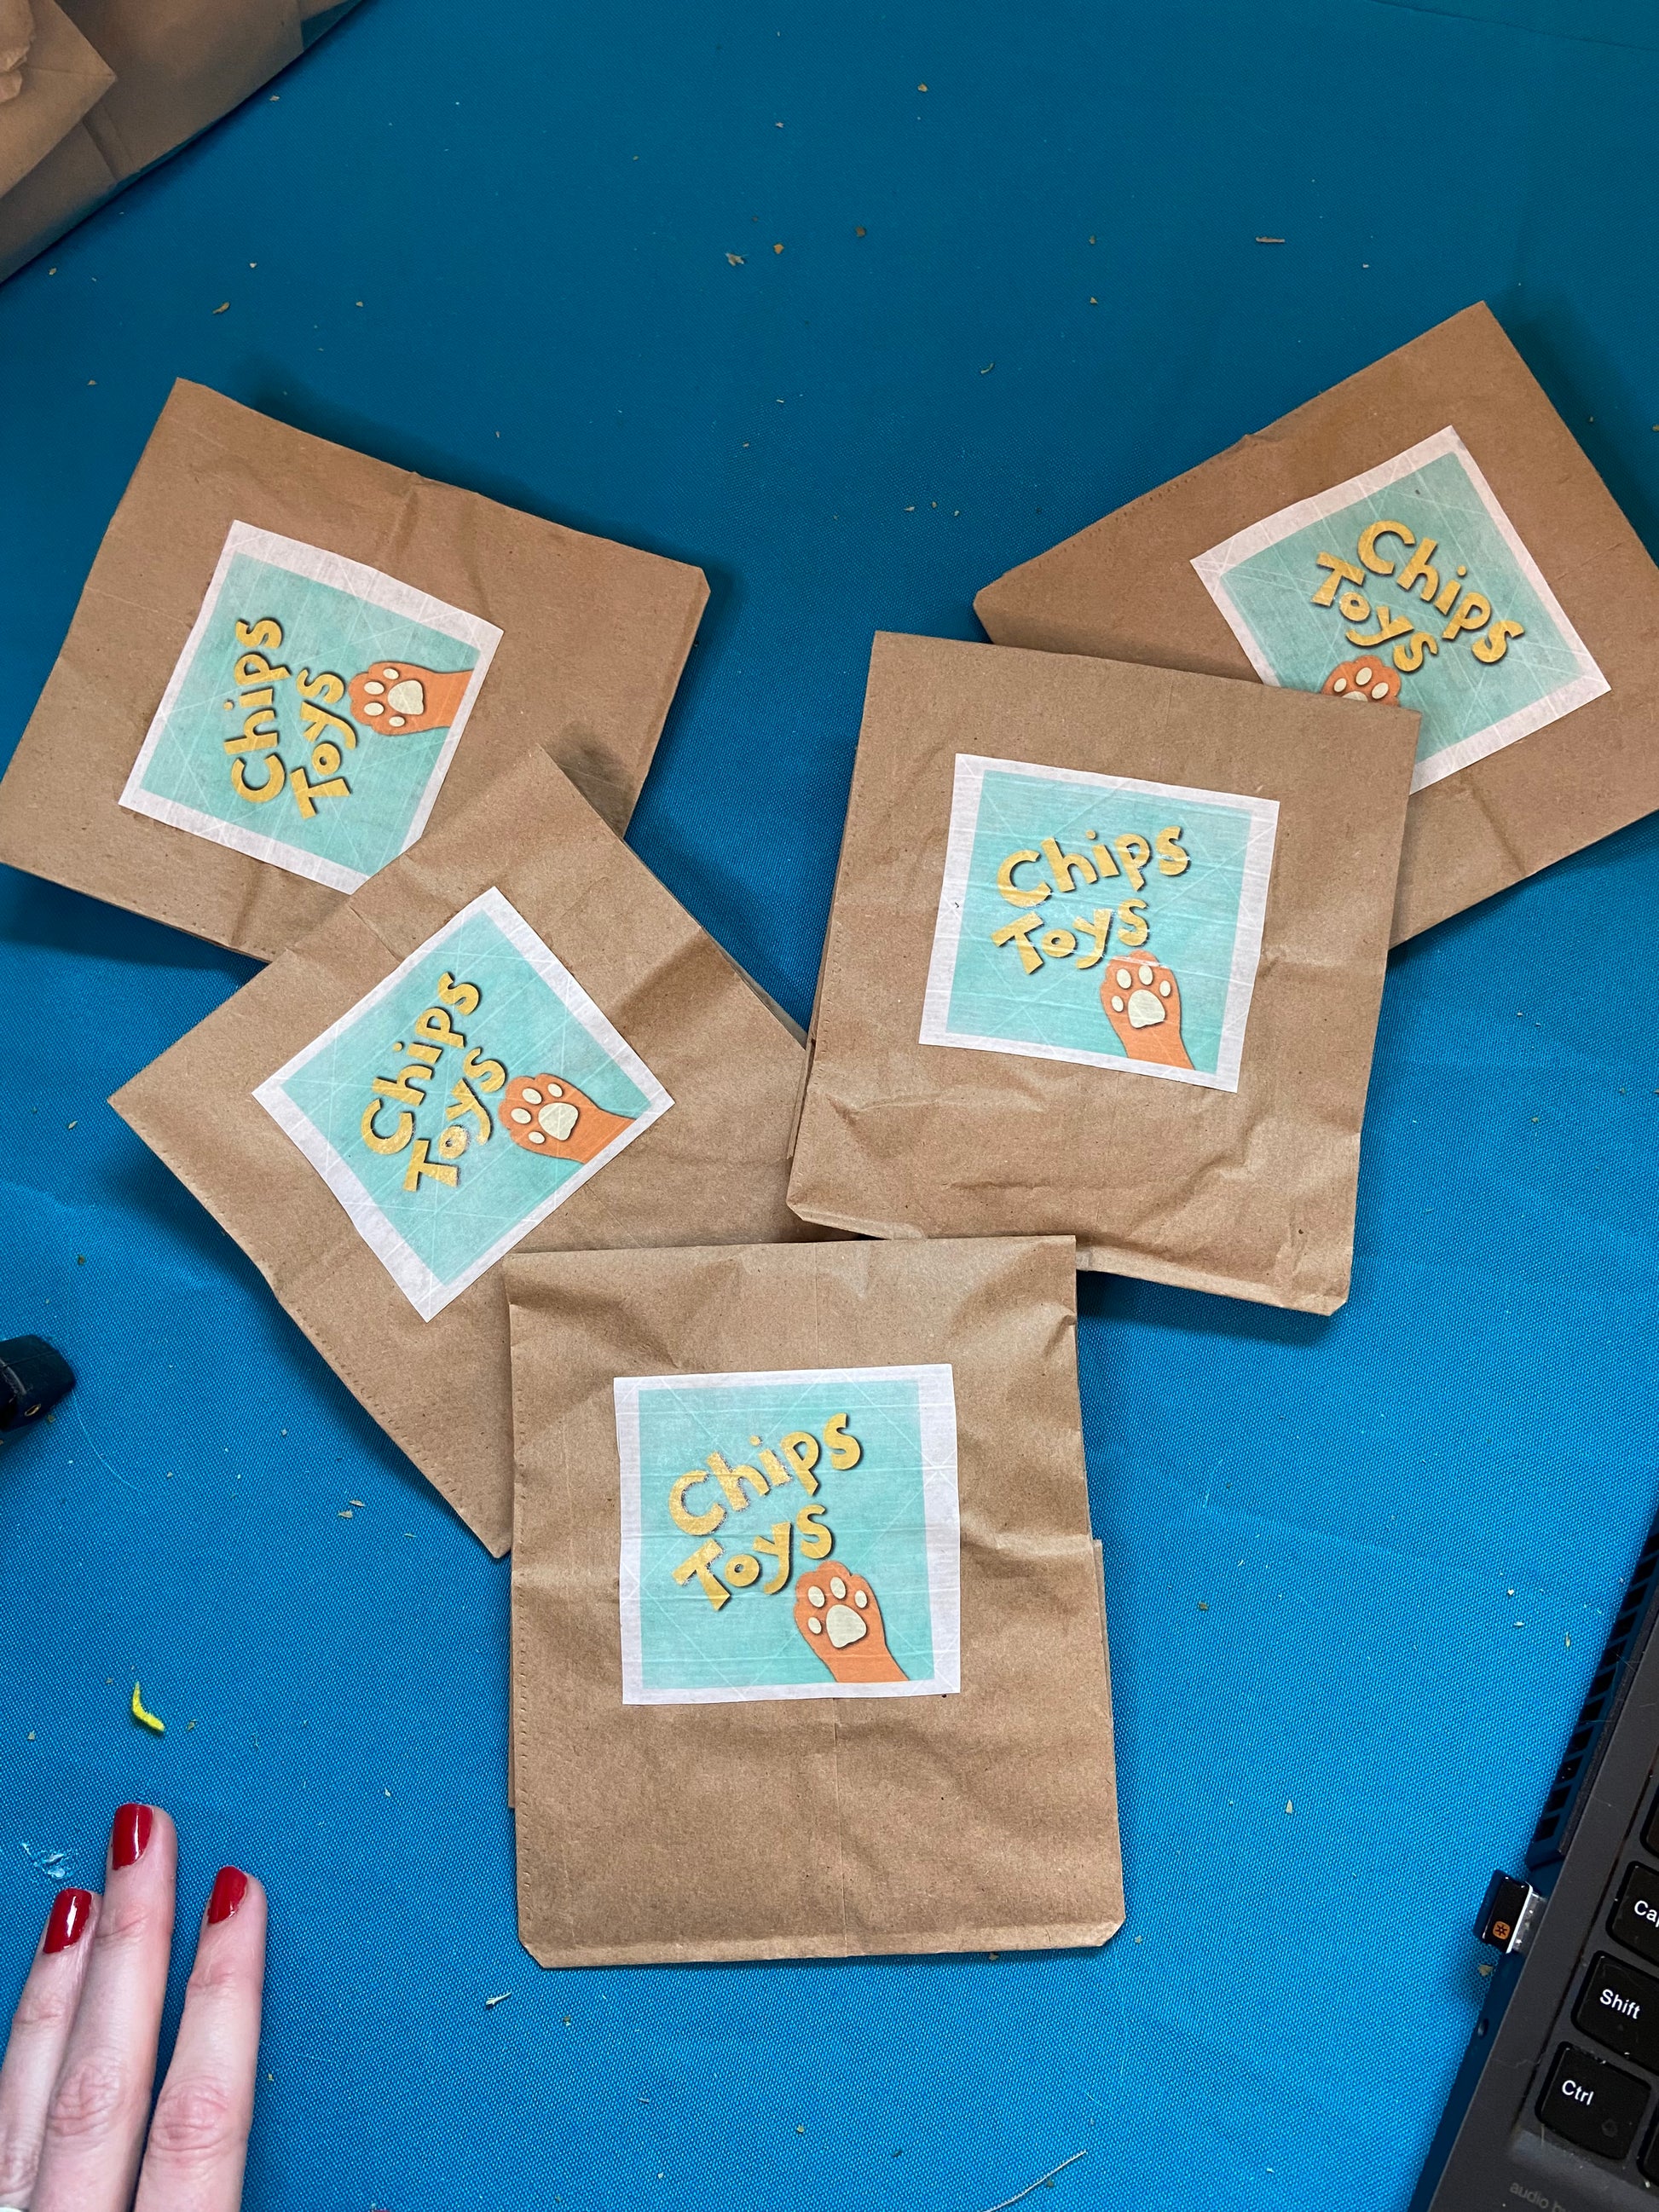 A group of 5 brown paper bags on a blue tablecloth. On each bag is a square sticker that says "Chips Toys" with a drawing of an orange cat paw below that.